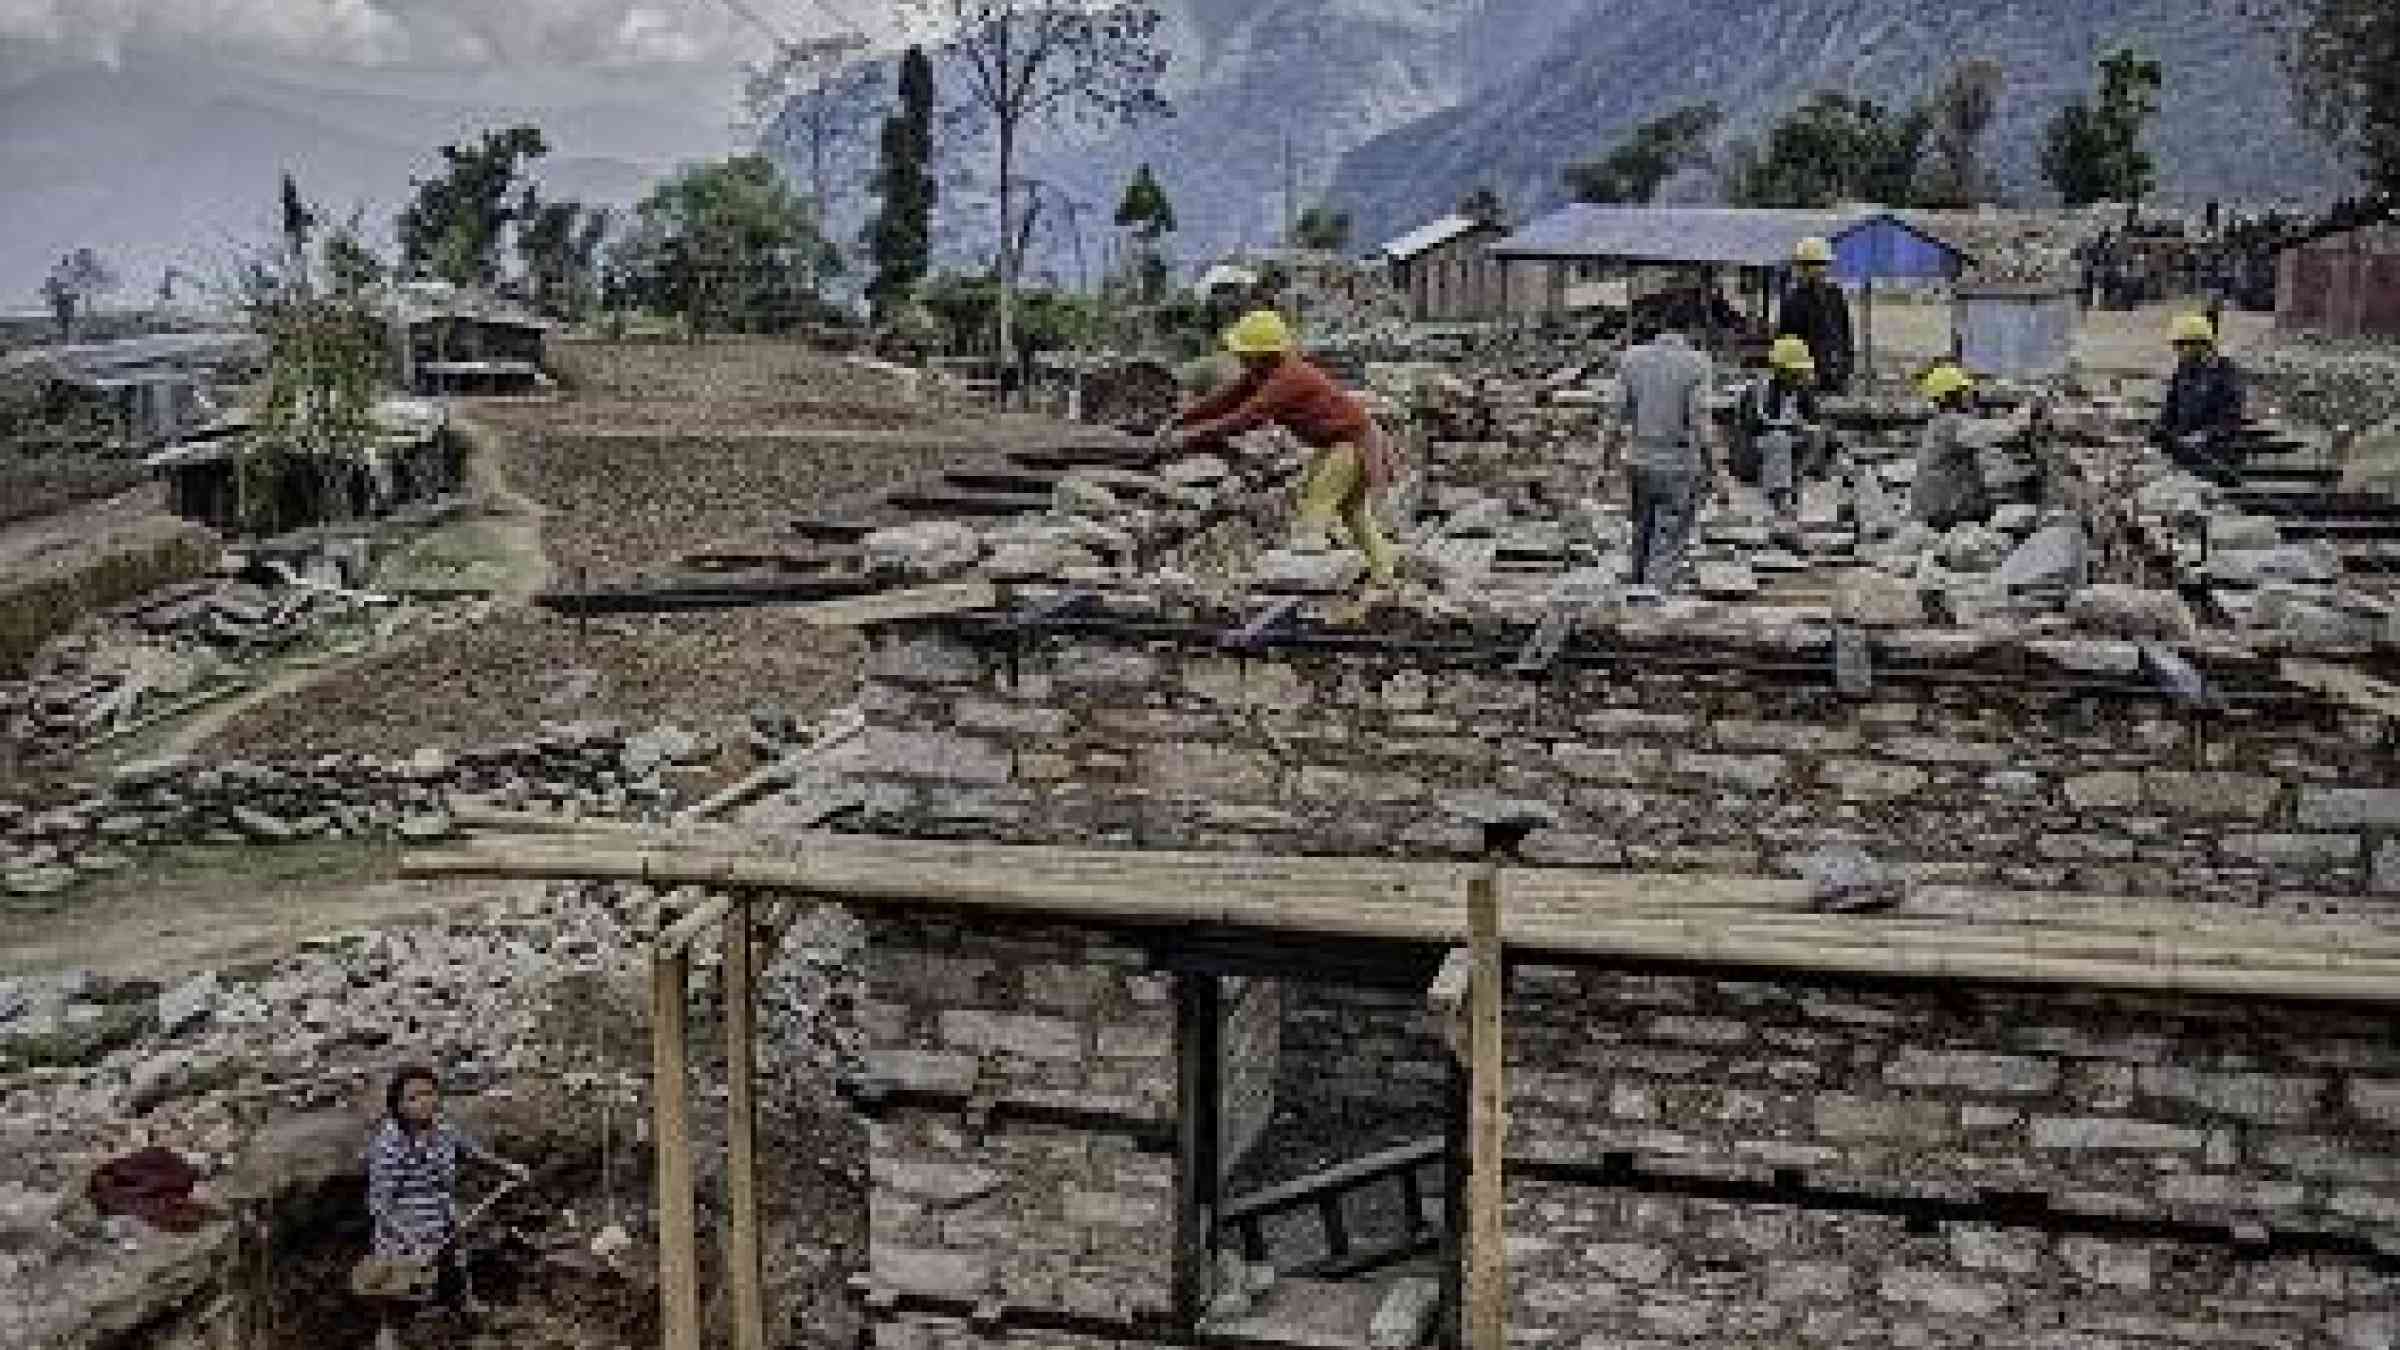 Nepal’s new Reconstruction Authority is embarking on a programme to provide over 500,000 low-cost, earthquake-resistant homes to some three million people (Photo: International Federation of Red Cross and Red Crescent Societies)